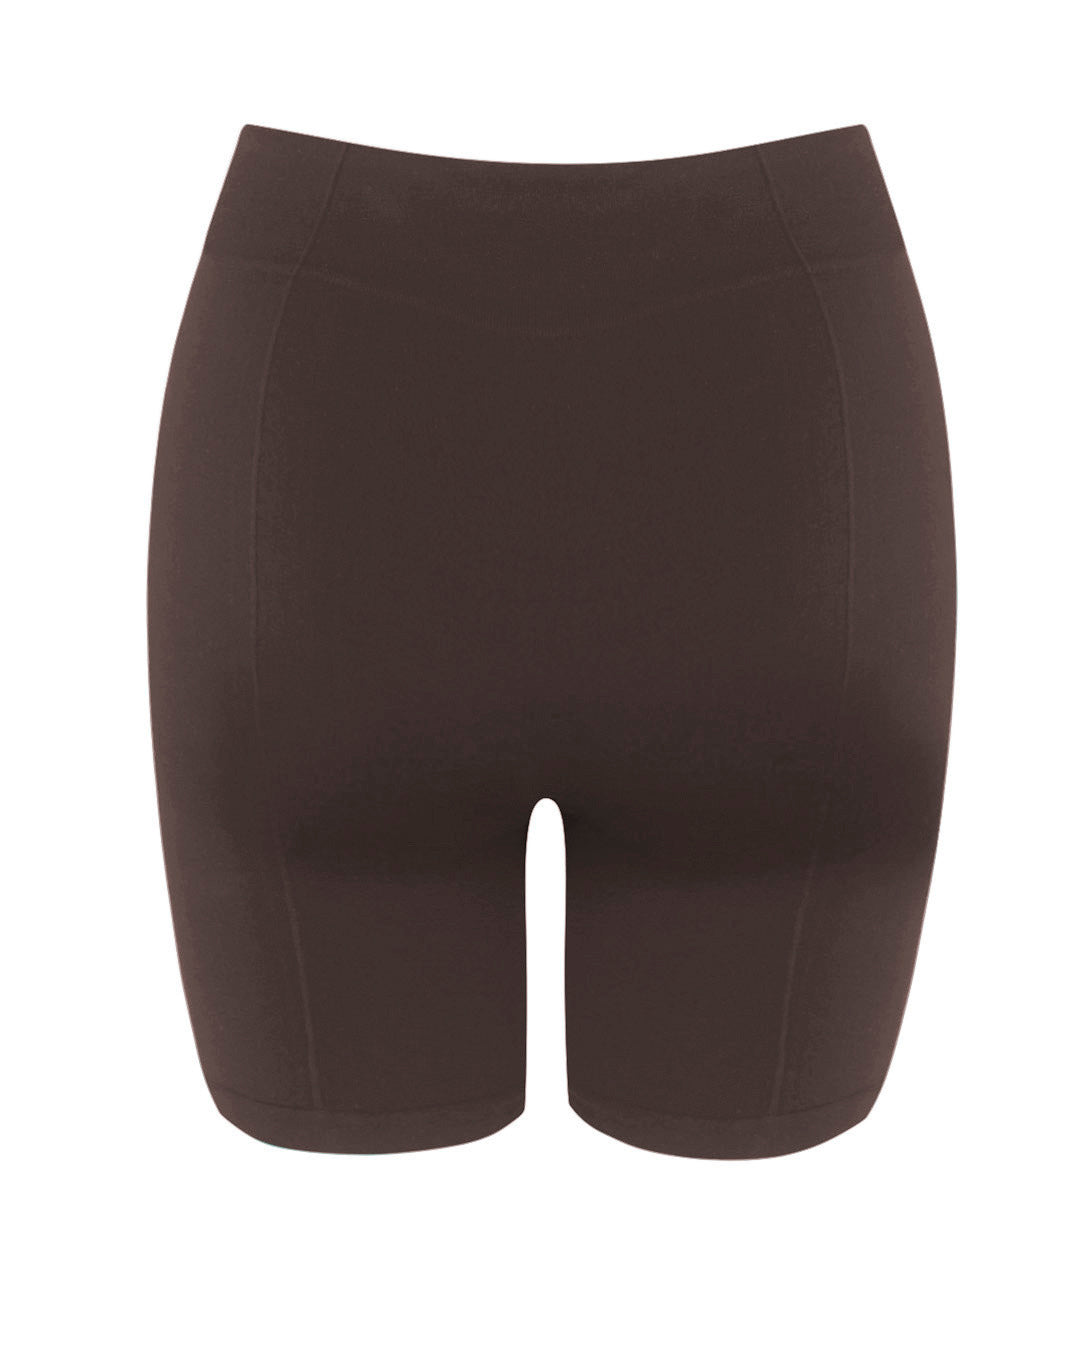 ELEVATED Shorts | Chocolate Brown | Image 3